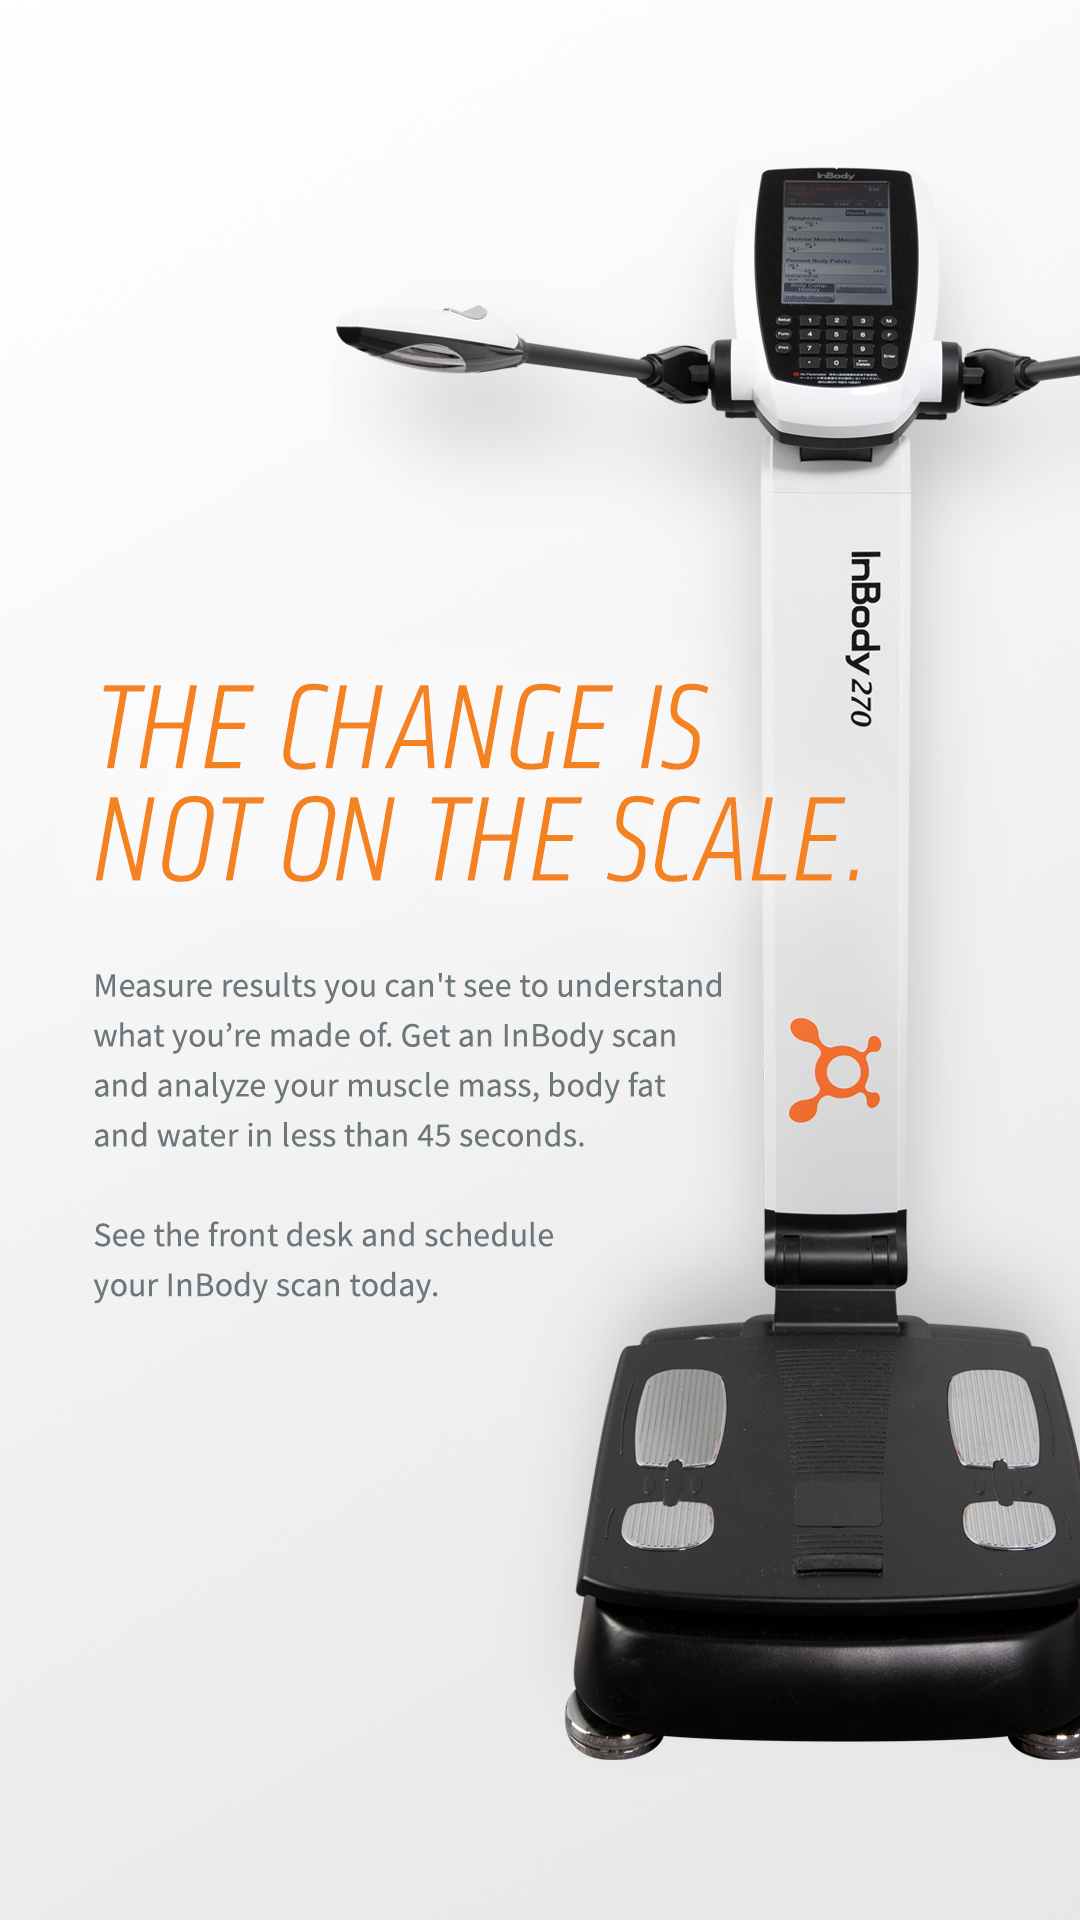 Orangetheory Fitness Cumberland - The heavy weight rack is not for